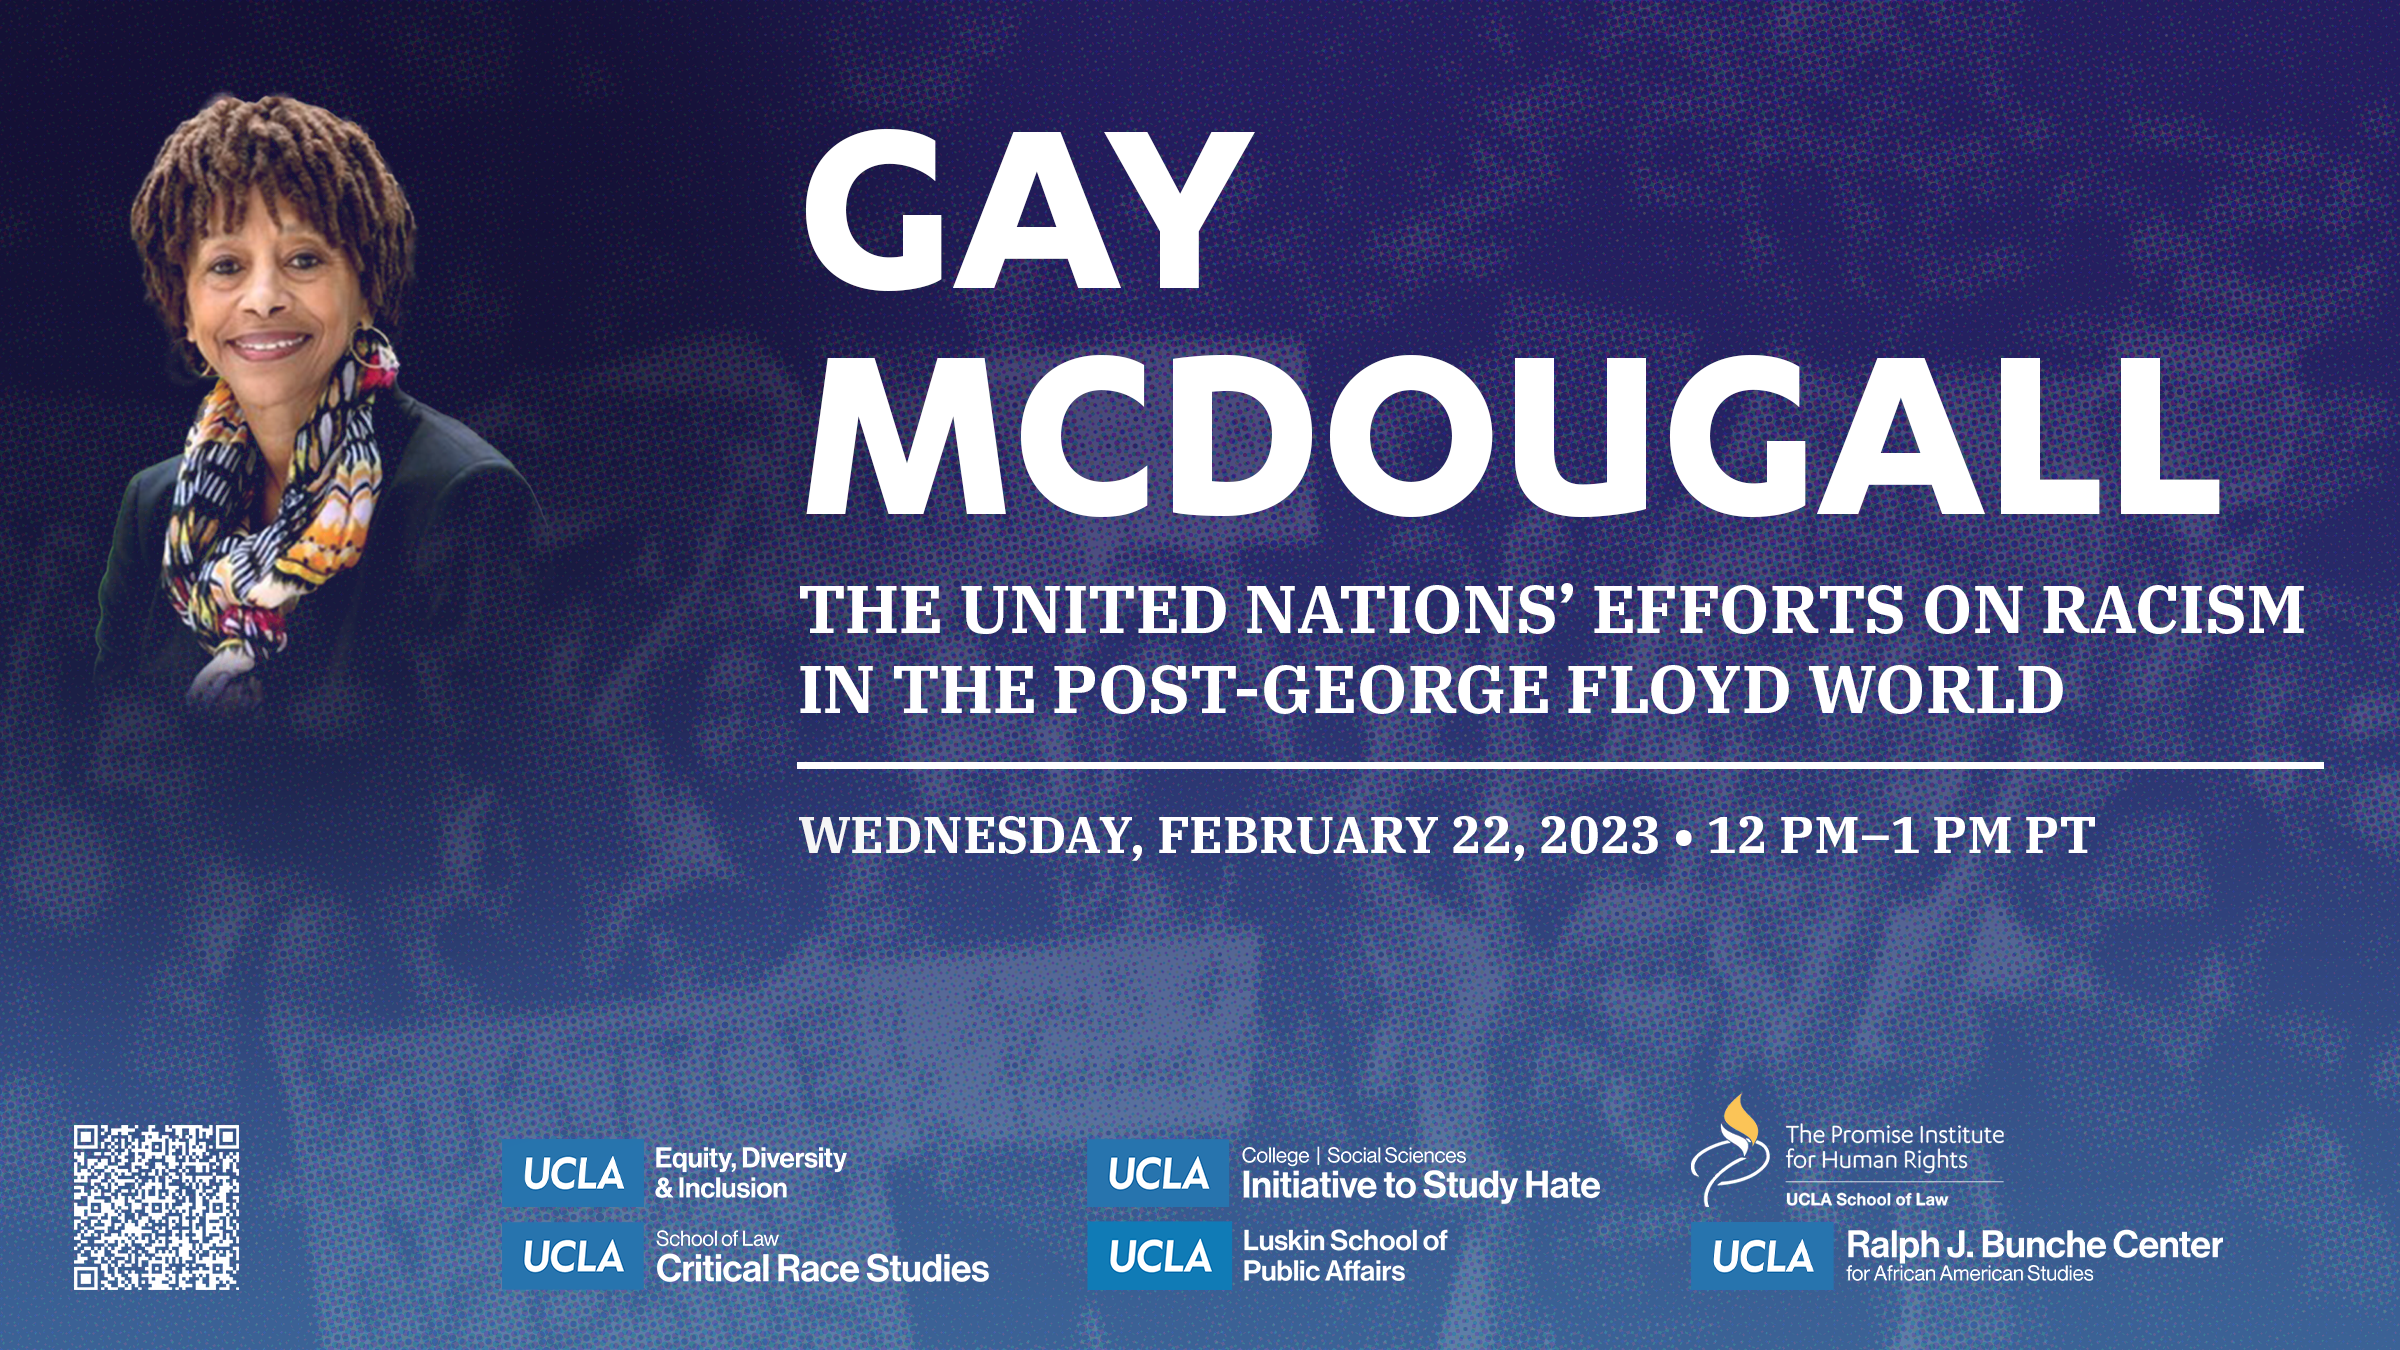 flyer for black history month keynote lecture - gay mcdougall: "the united nations' efforts on racism in the post-george floyd world", taking place on wednesday, february 22, 2023 from 12 pm-1 pm in the ucla school of law, room 1357